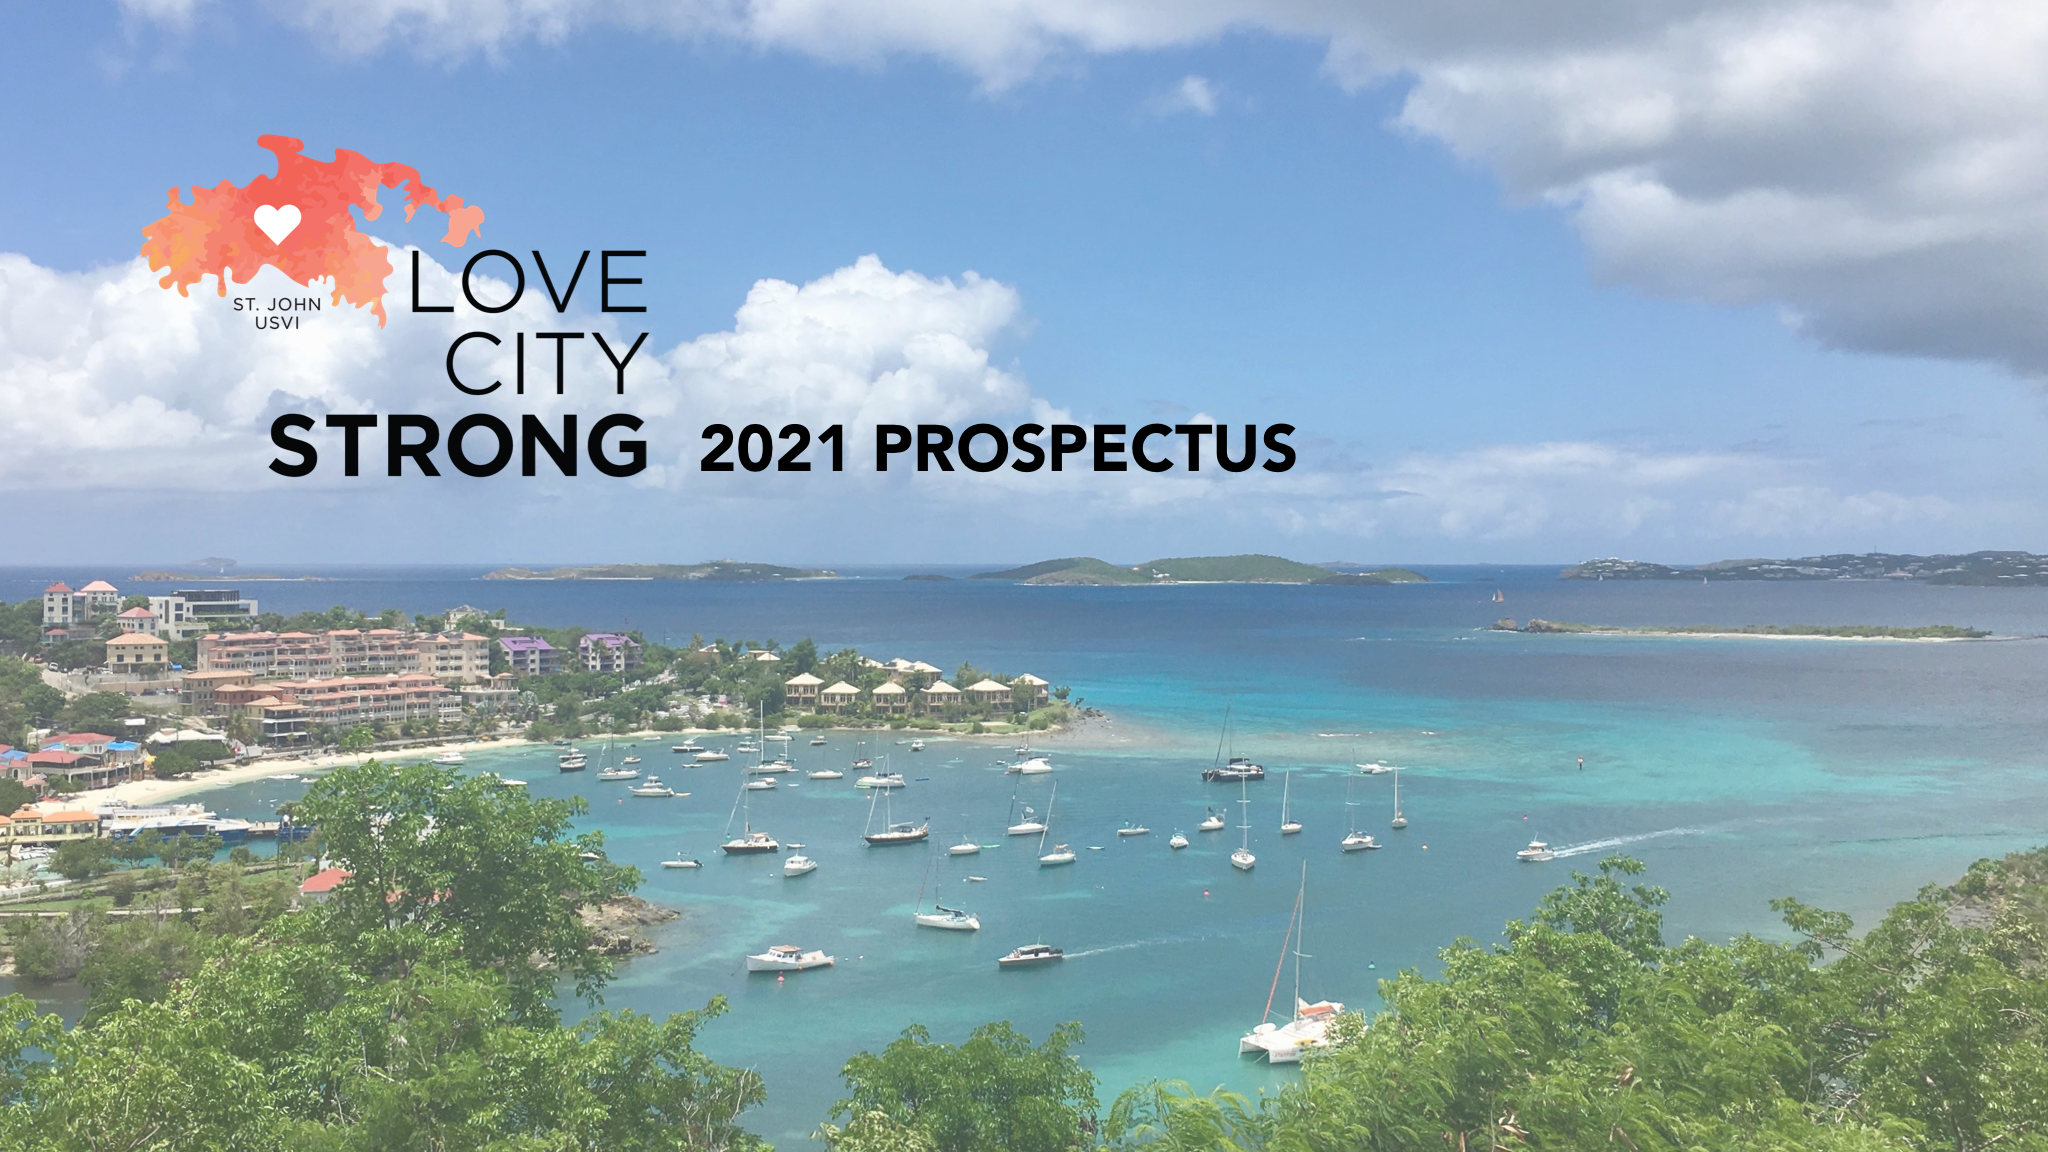 Love City Strong 2021 Prospectus Release